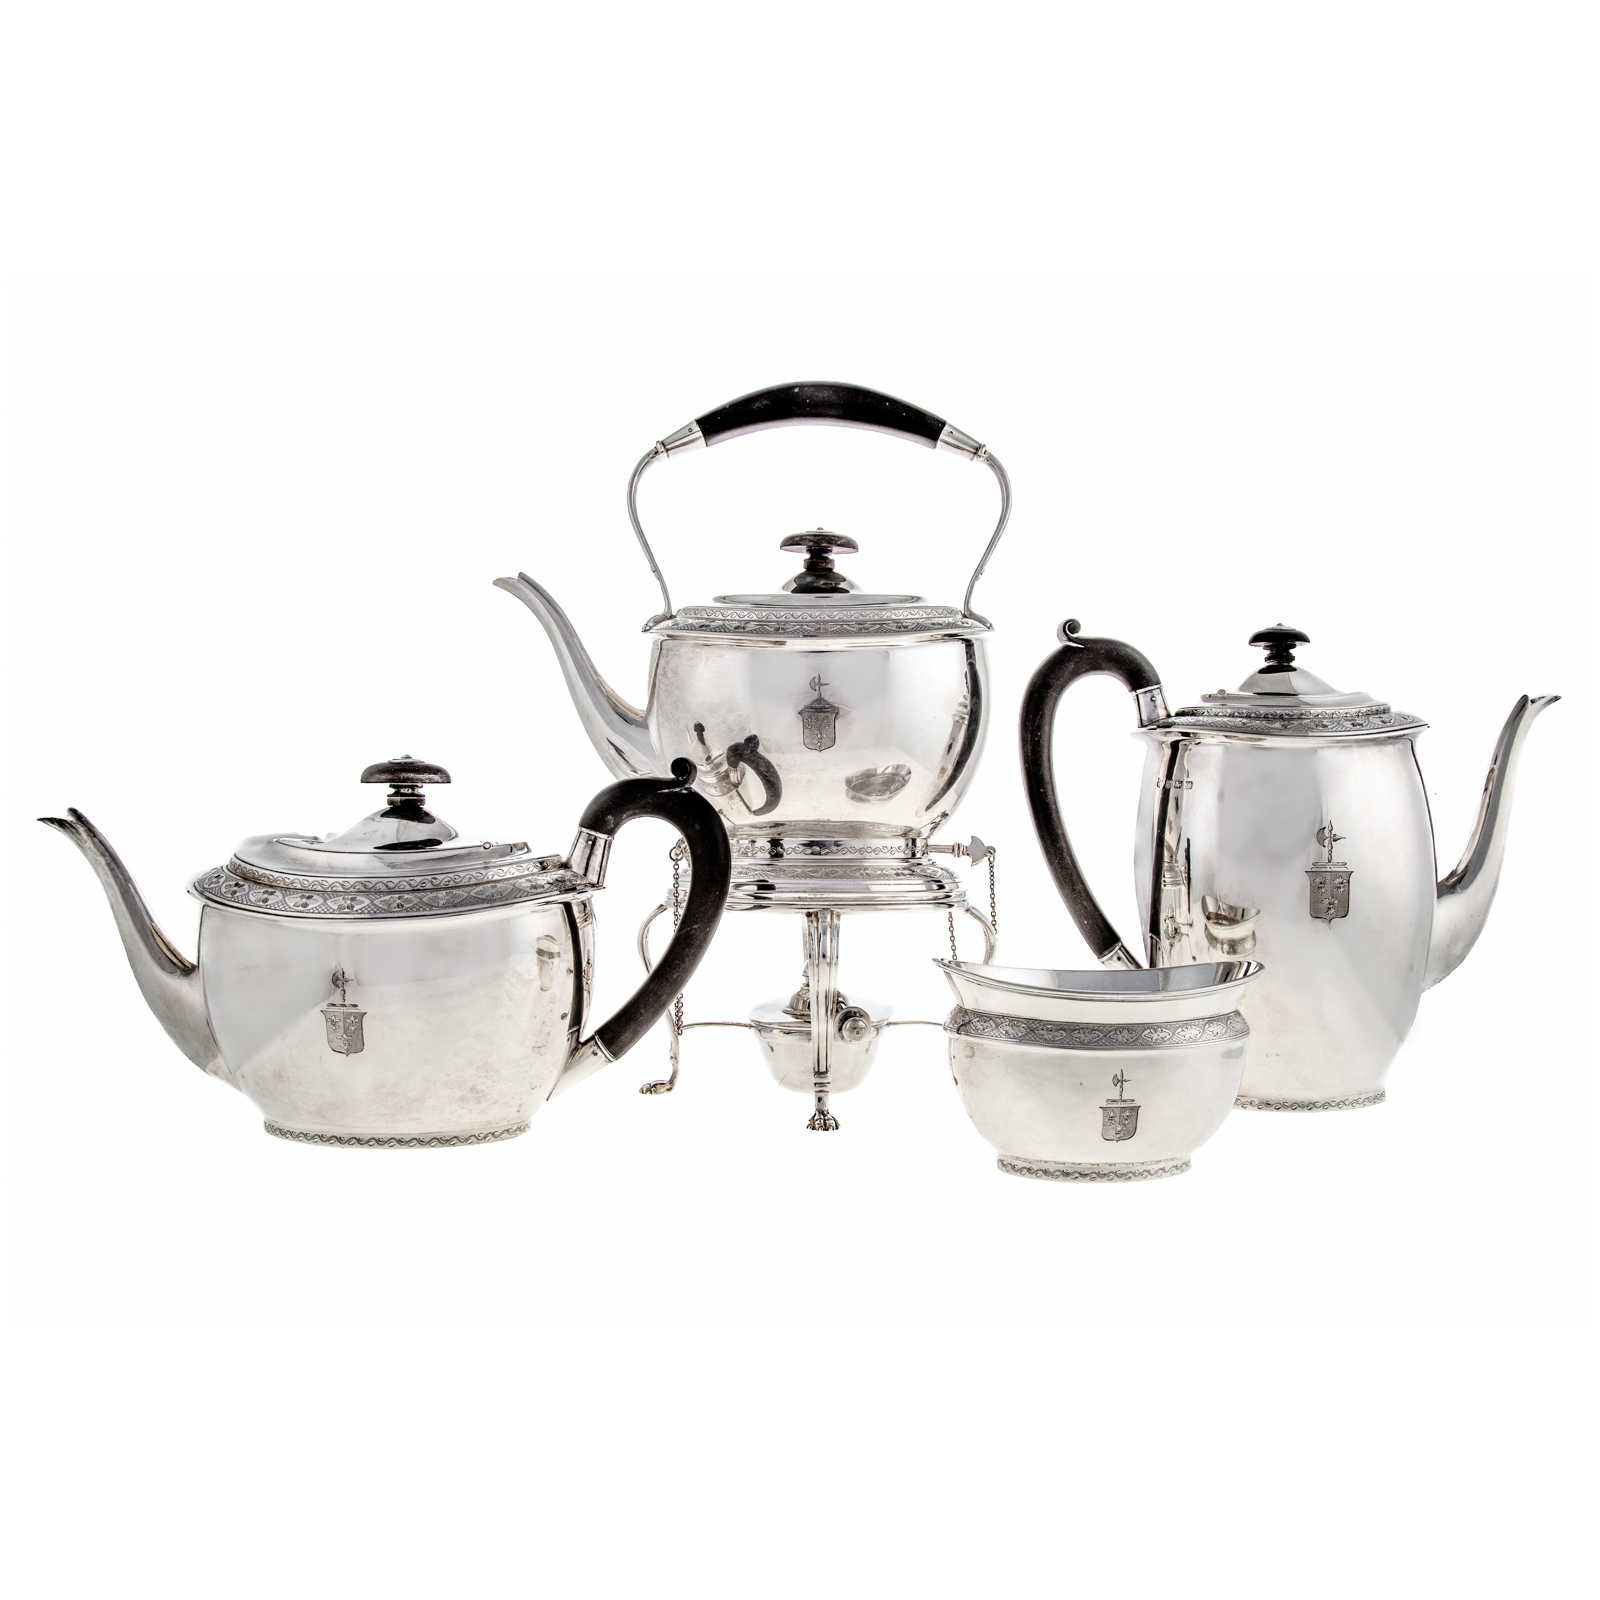 GEORGE VI SILVER COFFEE SET WITH